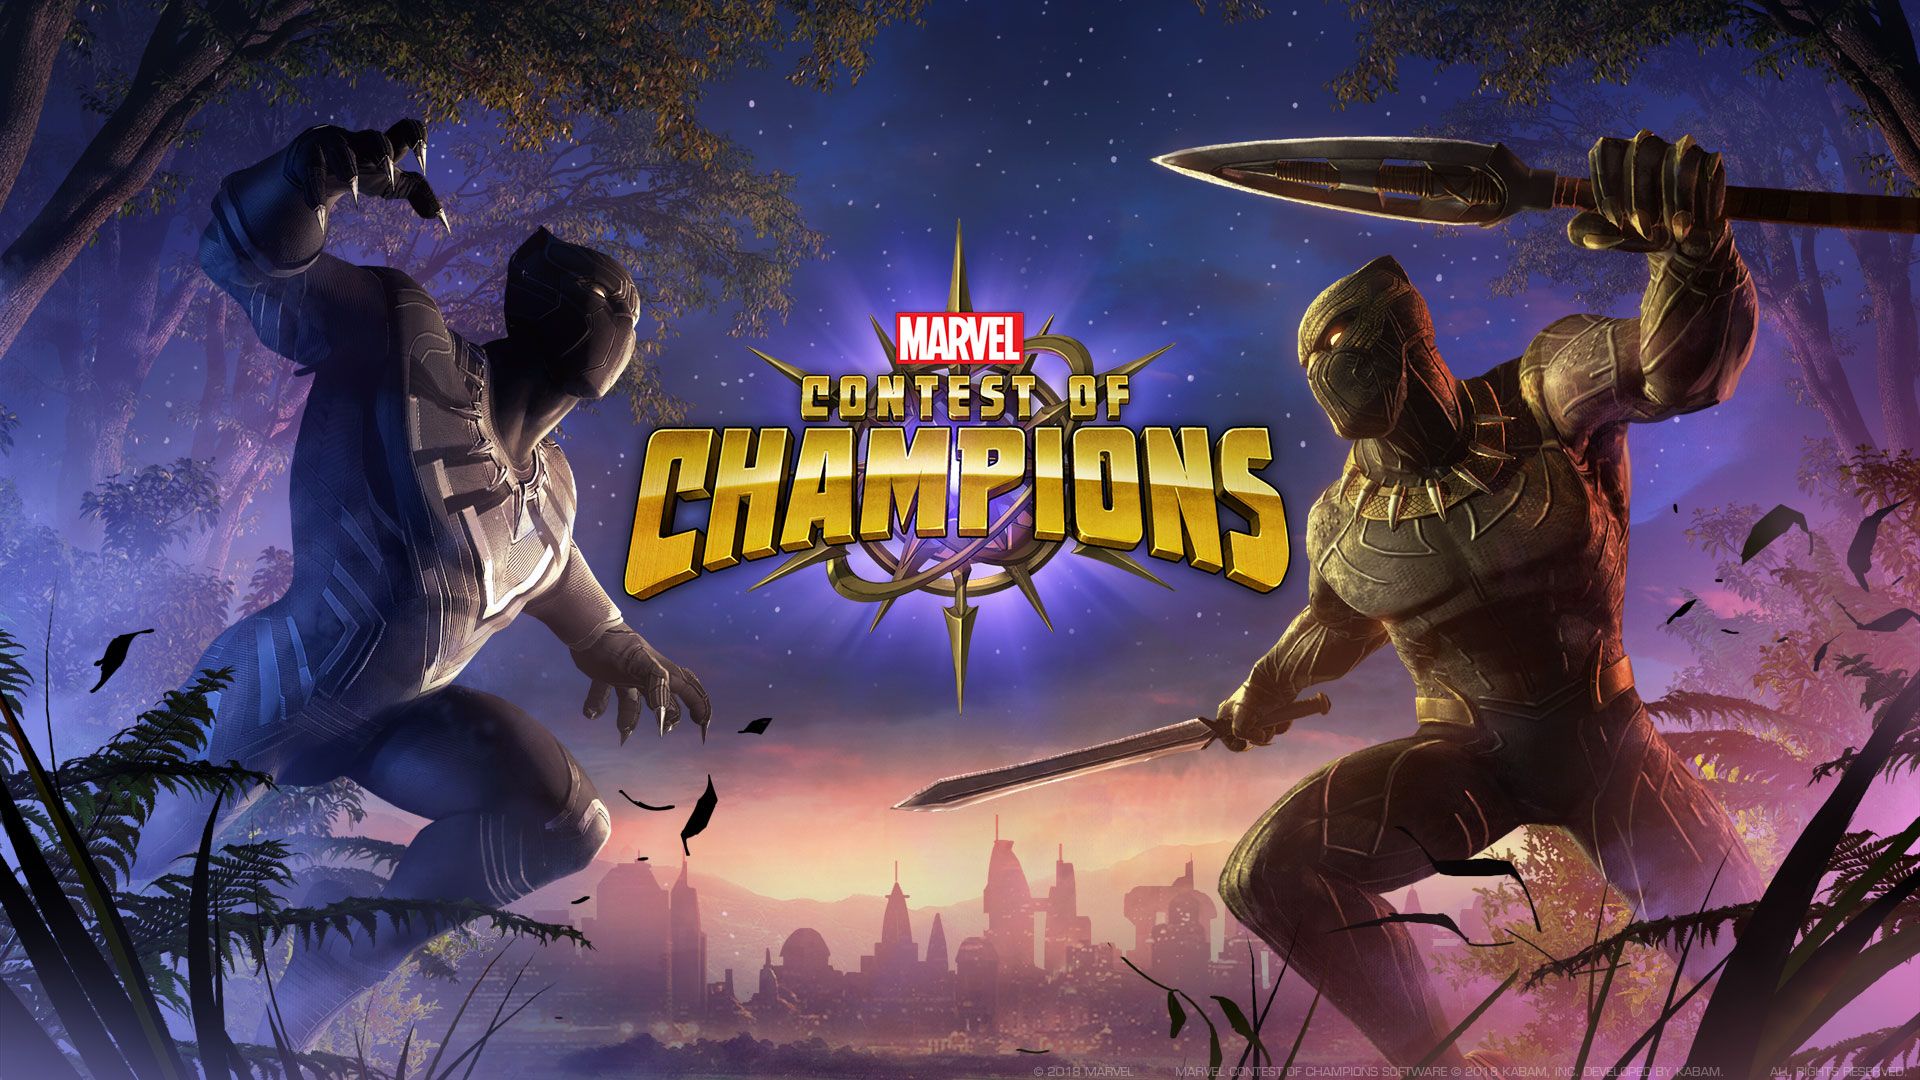 MARVEL Contest of Champions Wallpaper, Picture, Image